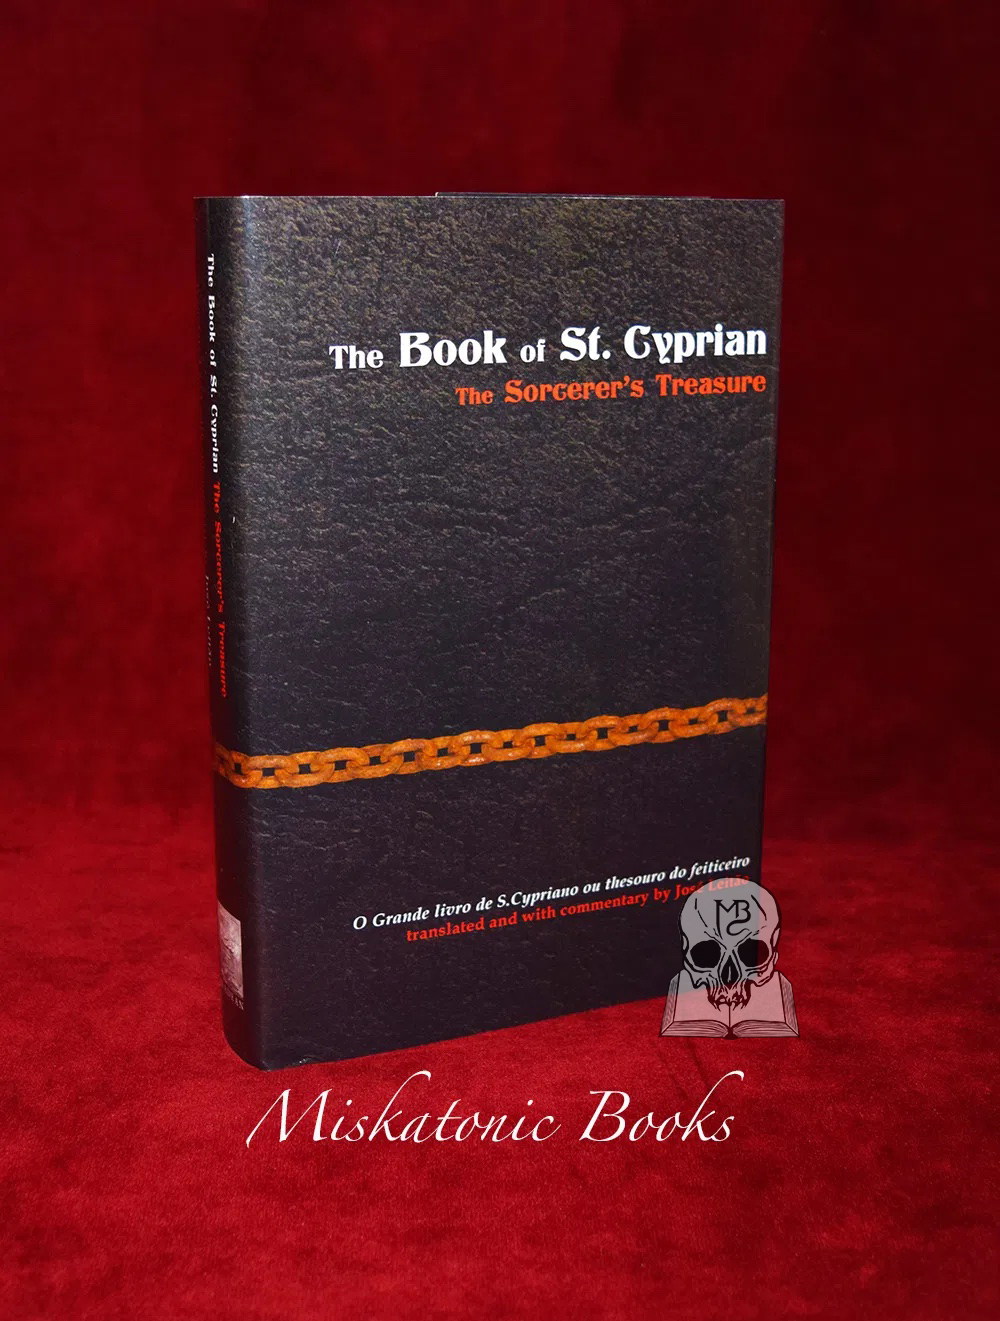 THE BOOK OF ST. CYPRIAN: THE SORCERER’S TREASURE by Jose Leitao - Hardcover Edition